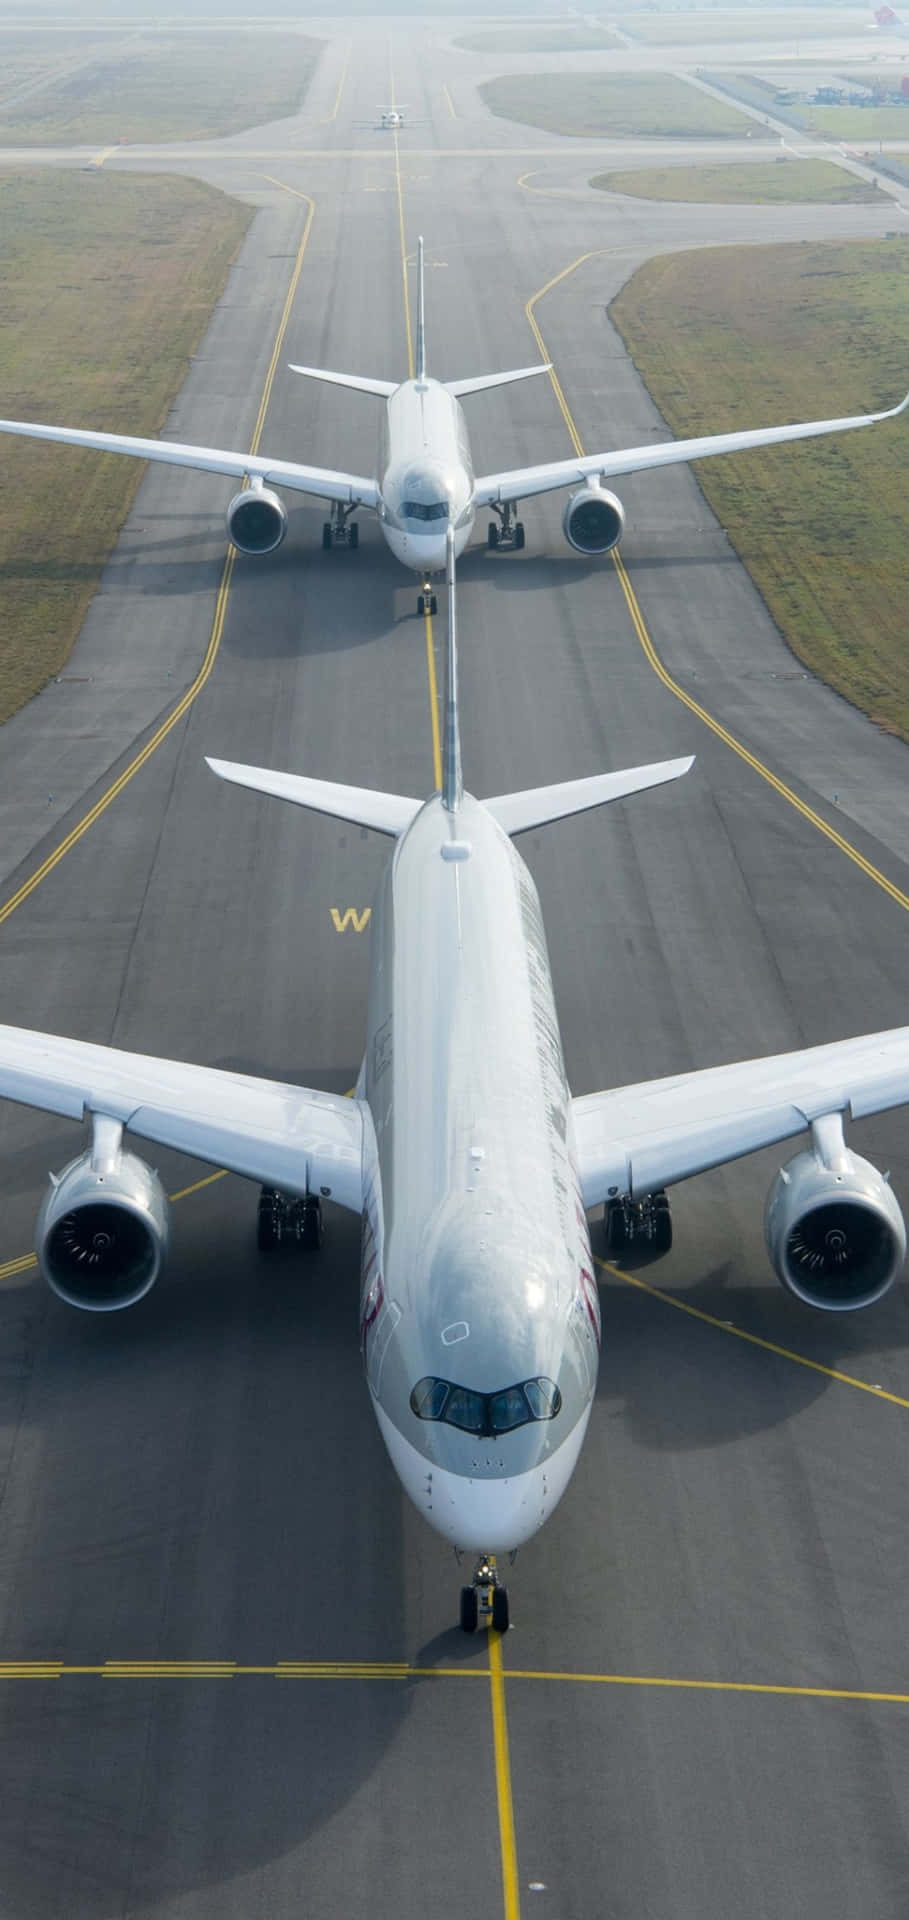 Two Large Airplanes On The Runway Wallpaper